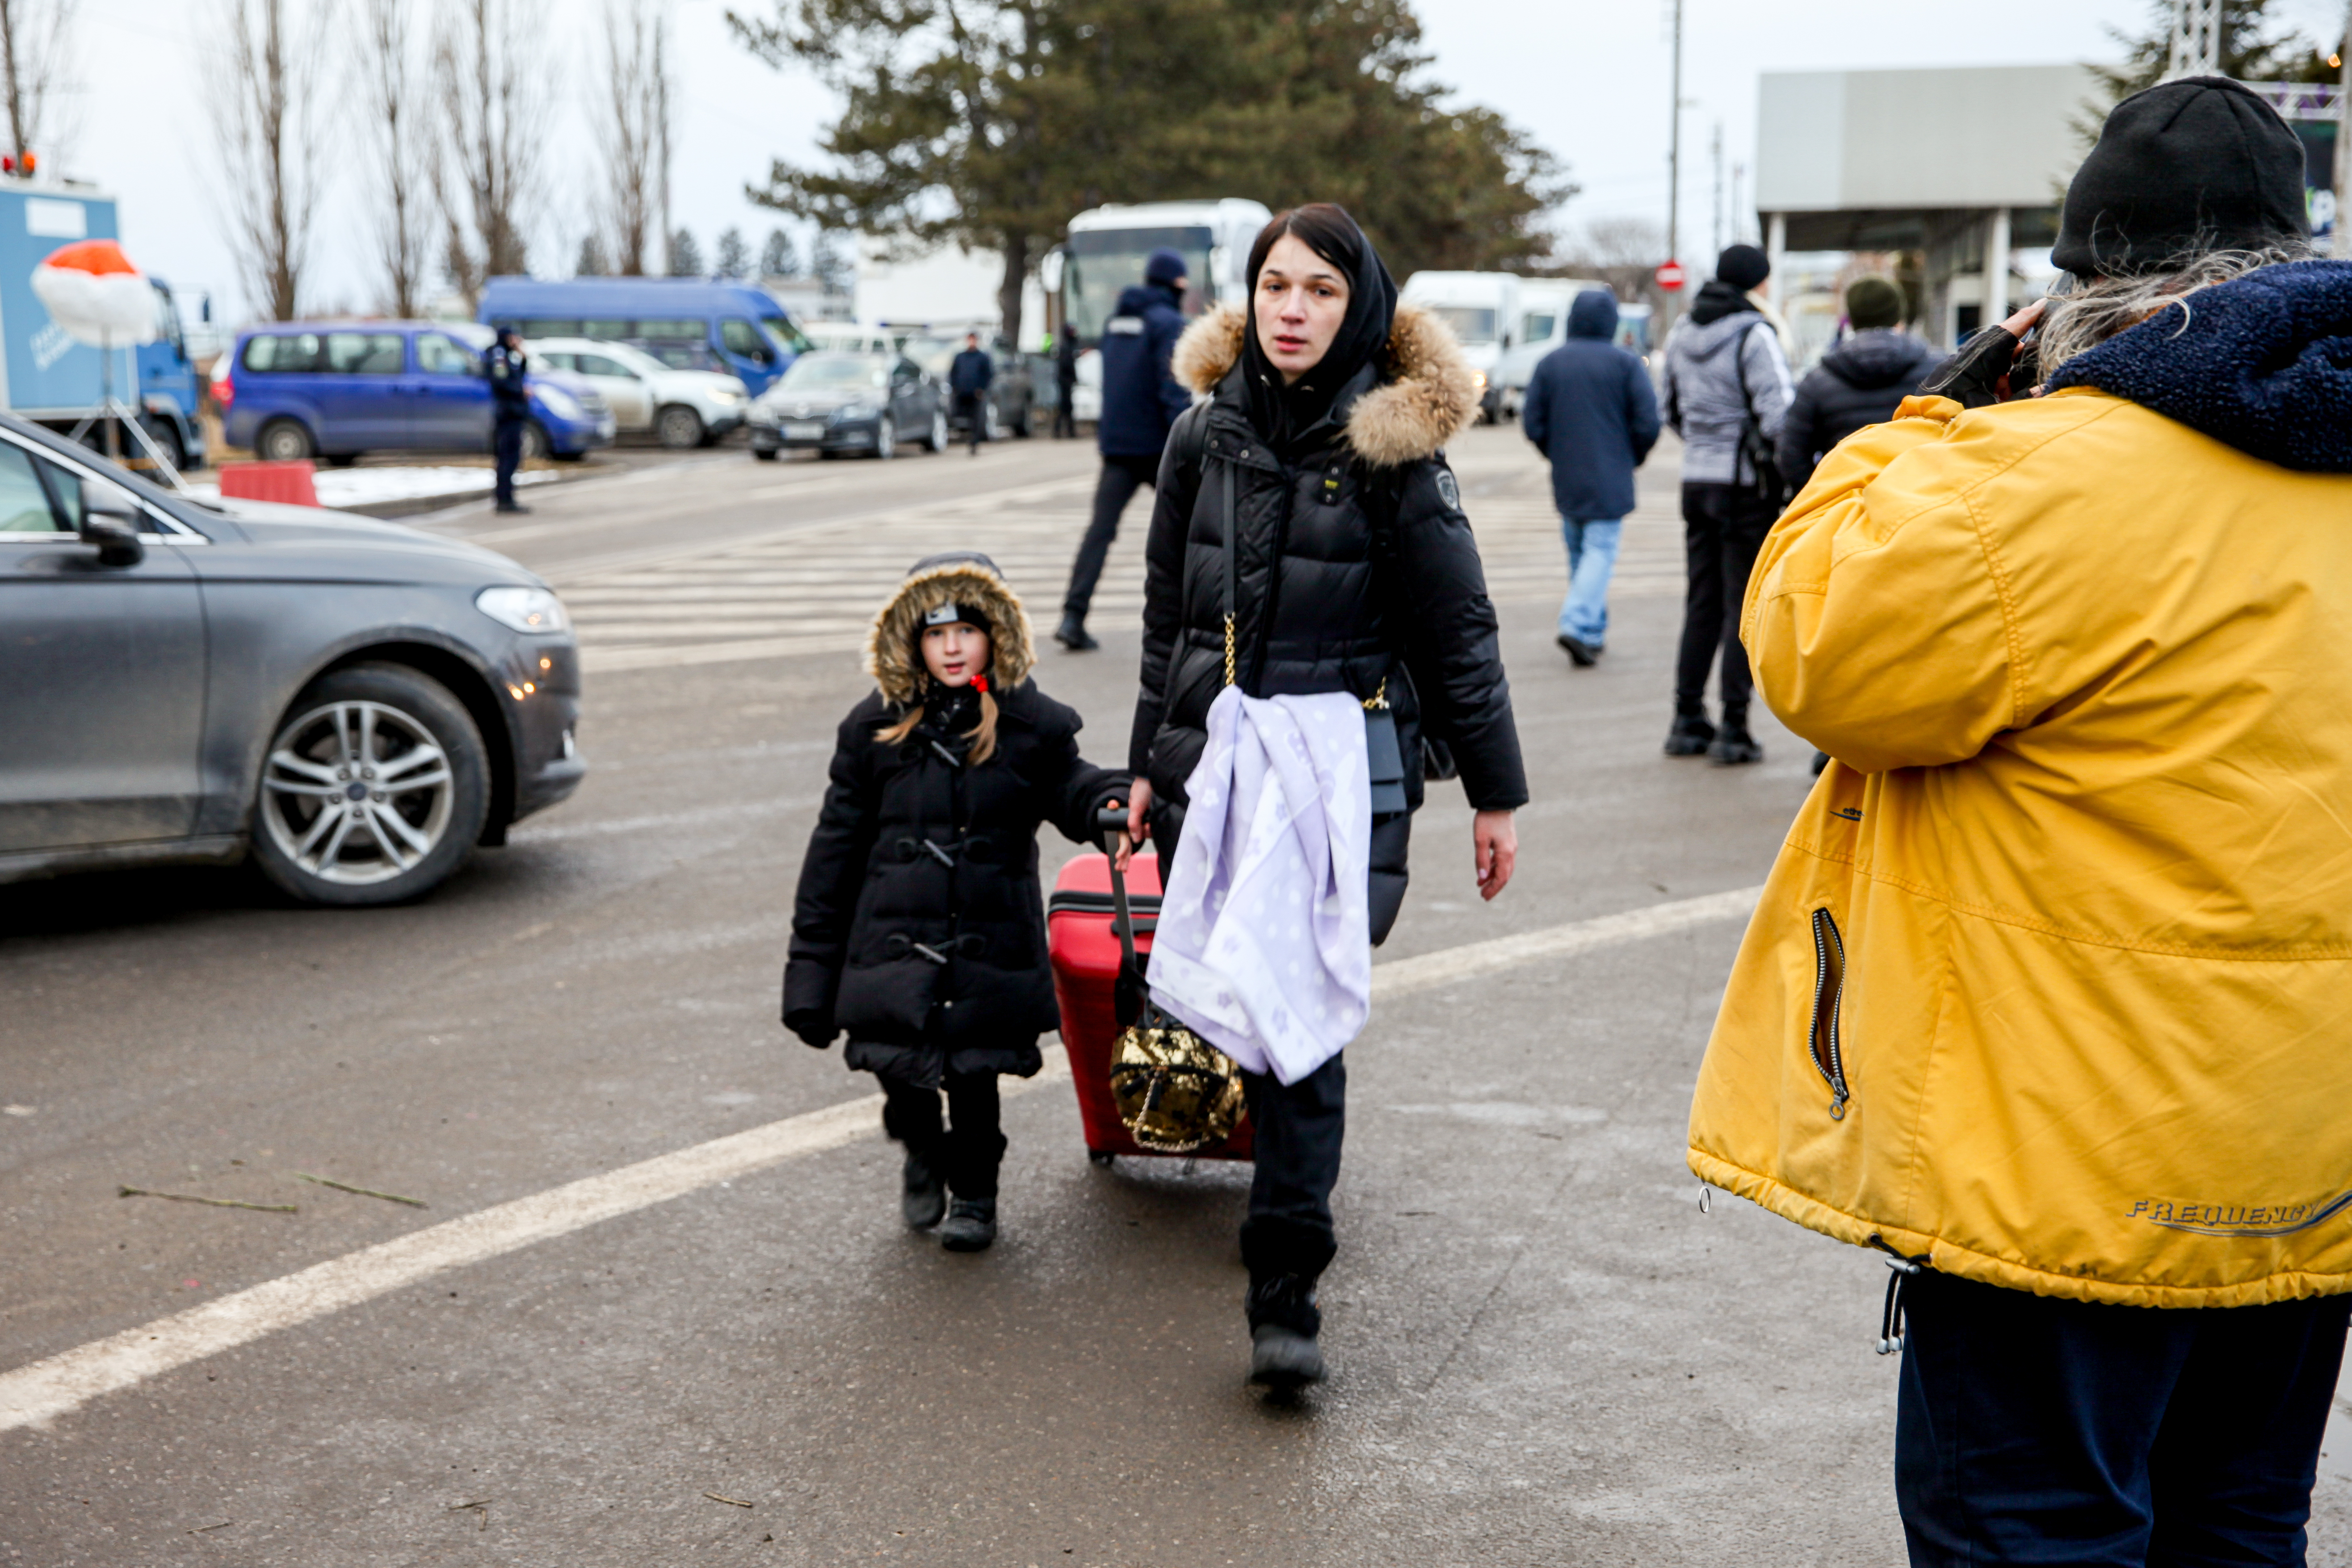 Refugees in search of safety after fleeing Ukraine